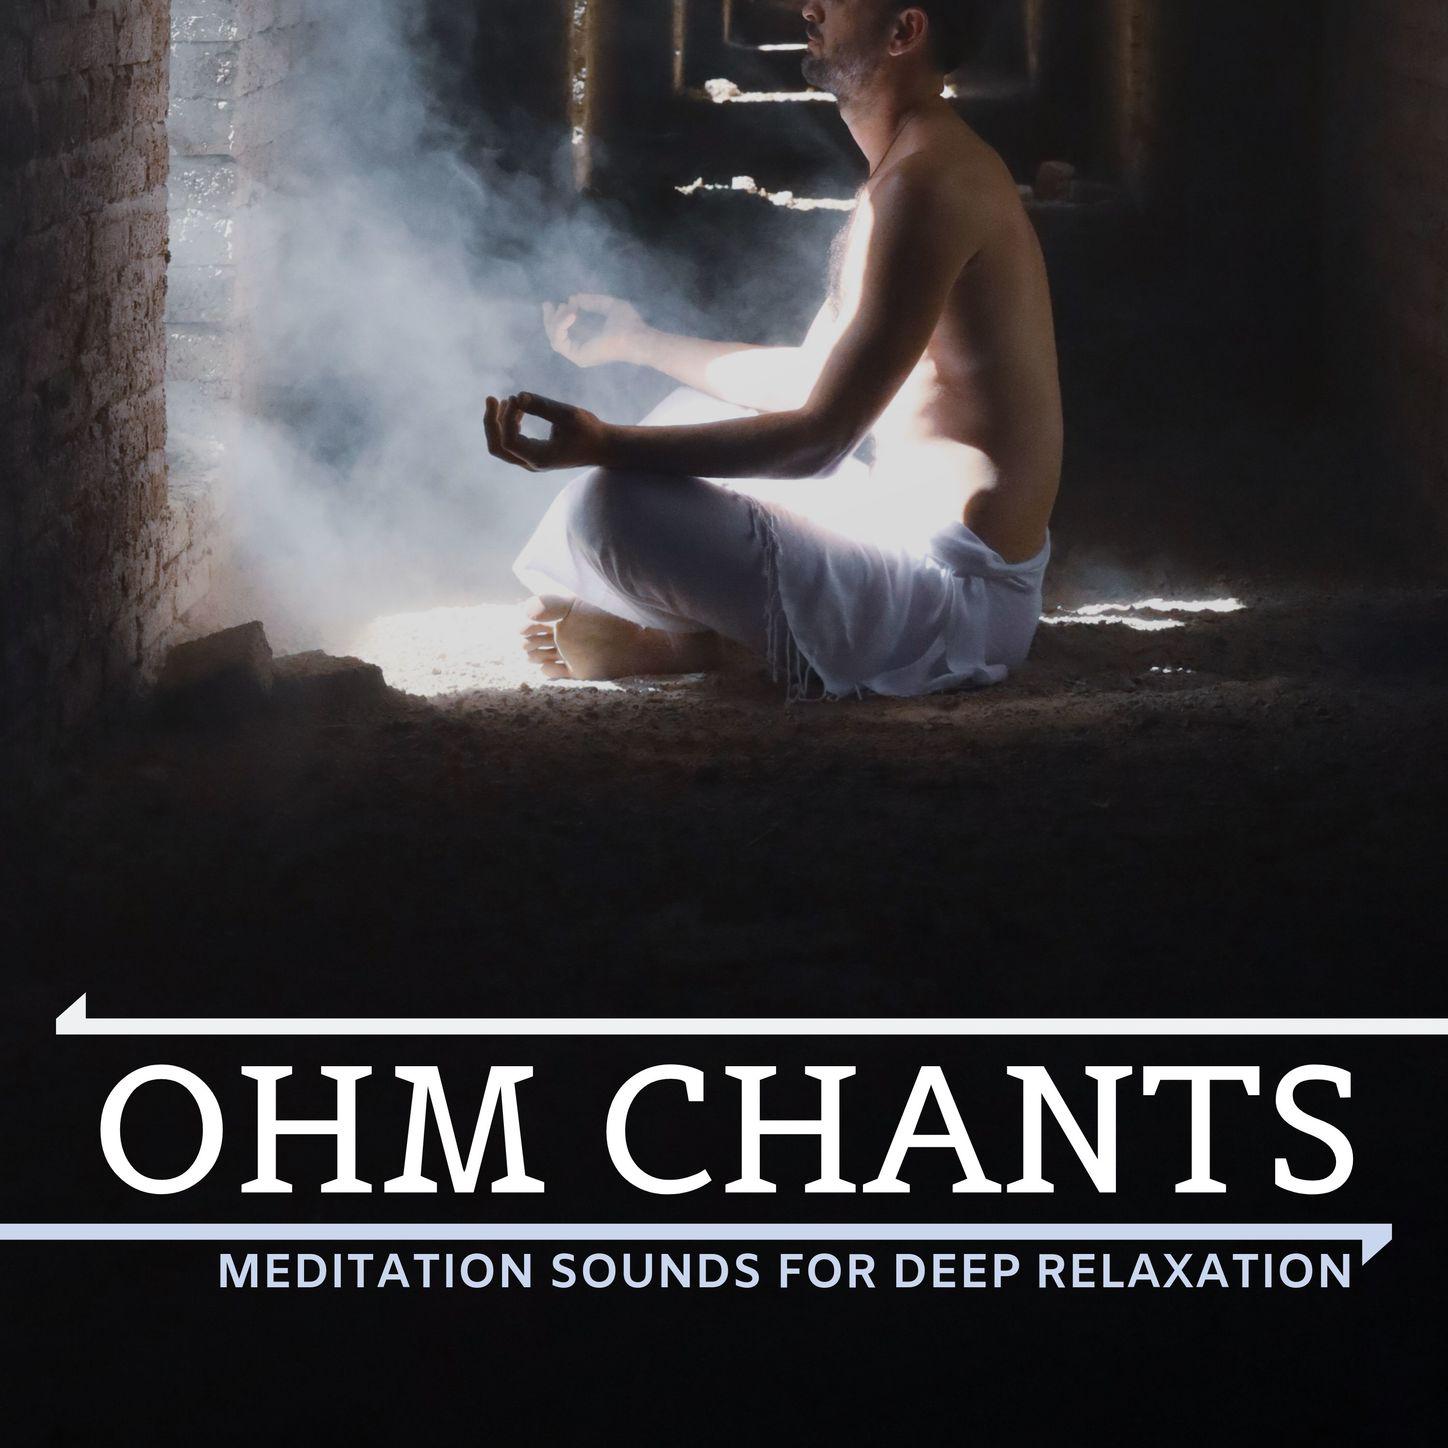 Ohm Chants - Meditation Sounds for Deep Relaxation